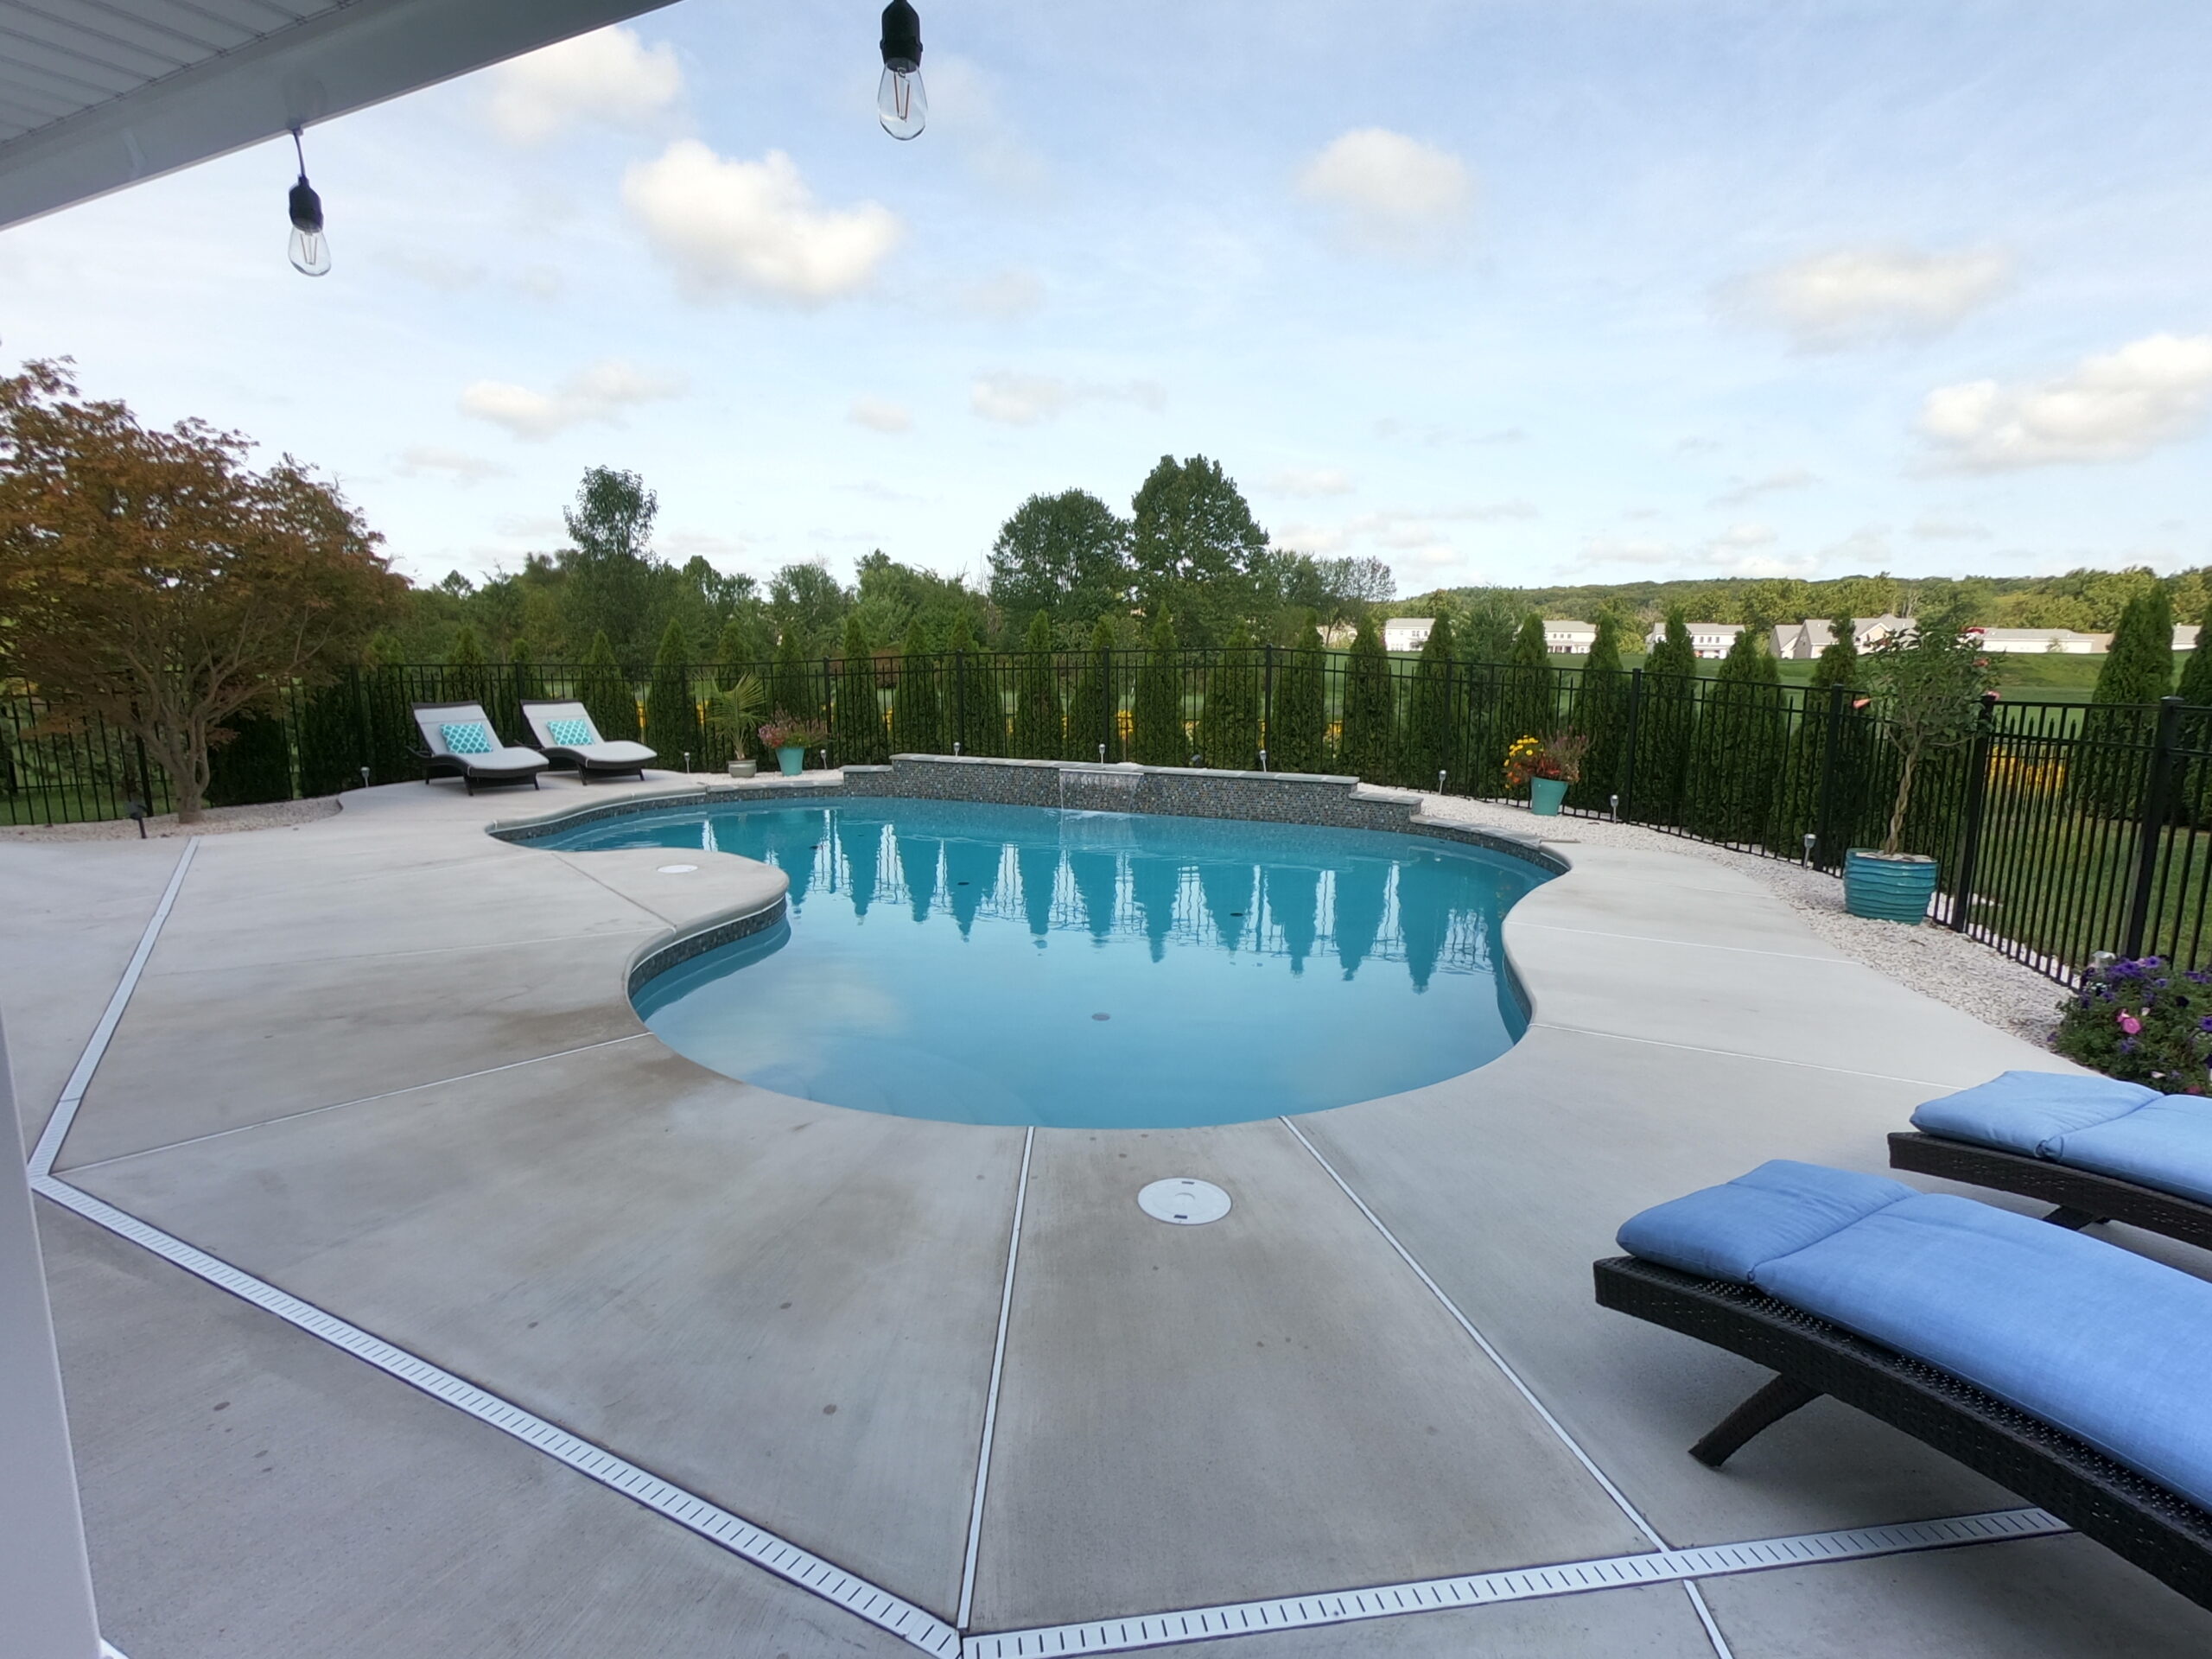 Featured image for “Off-Season Pool Renovations to Consider”